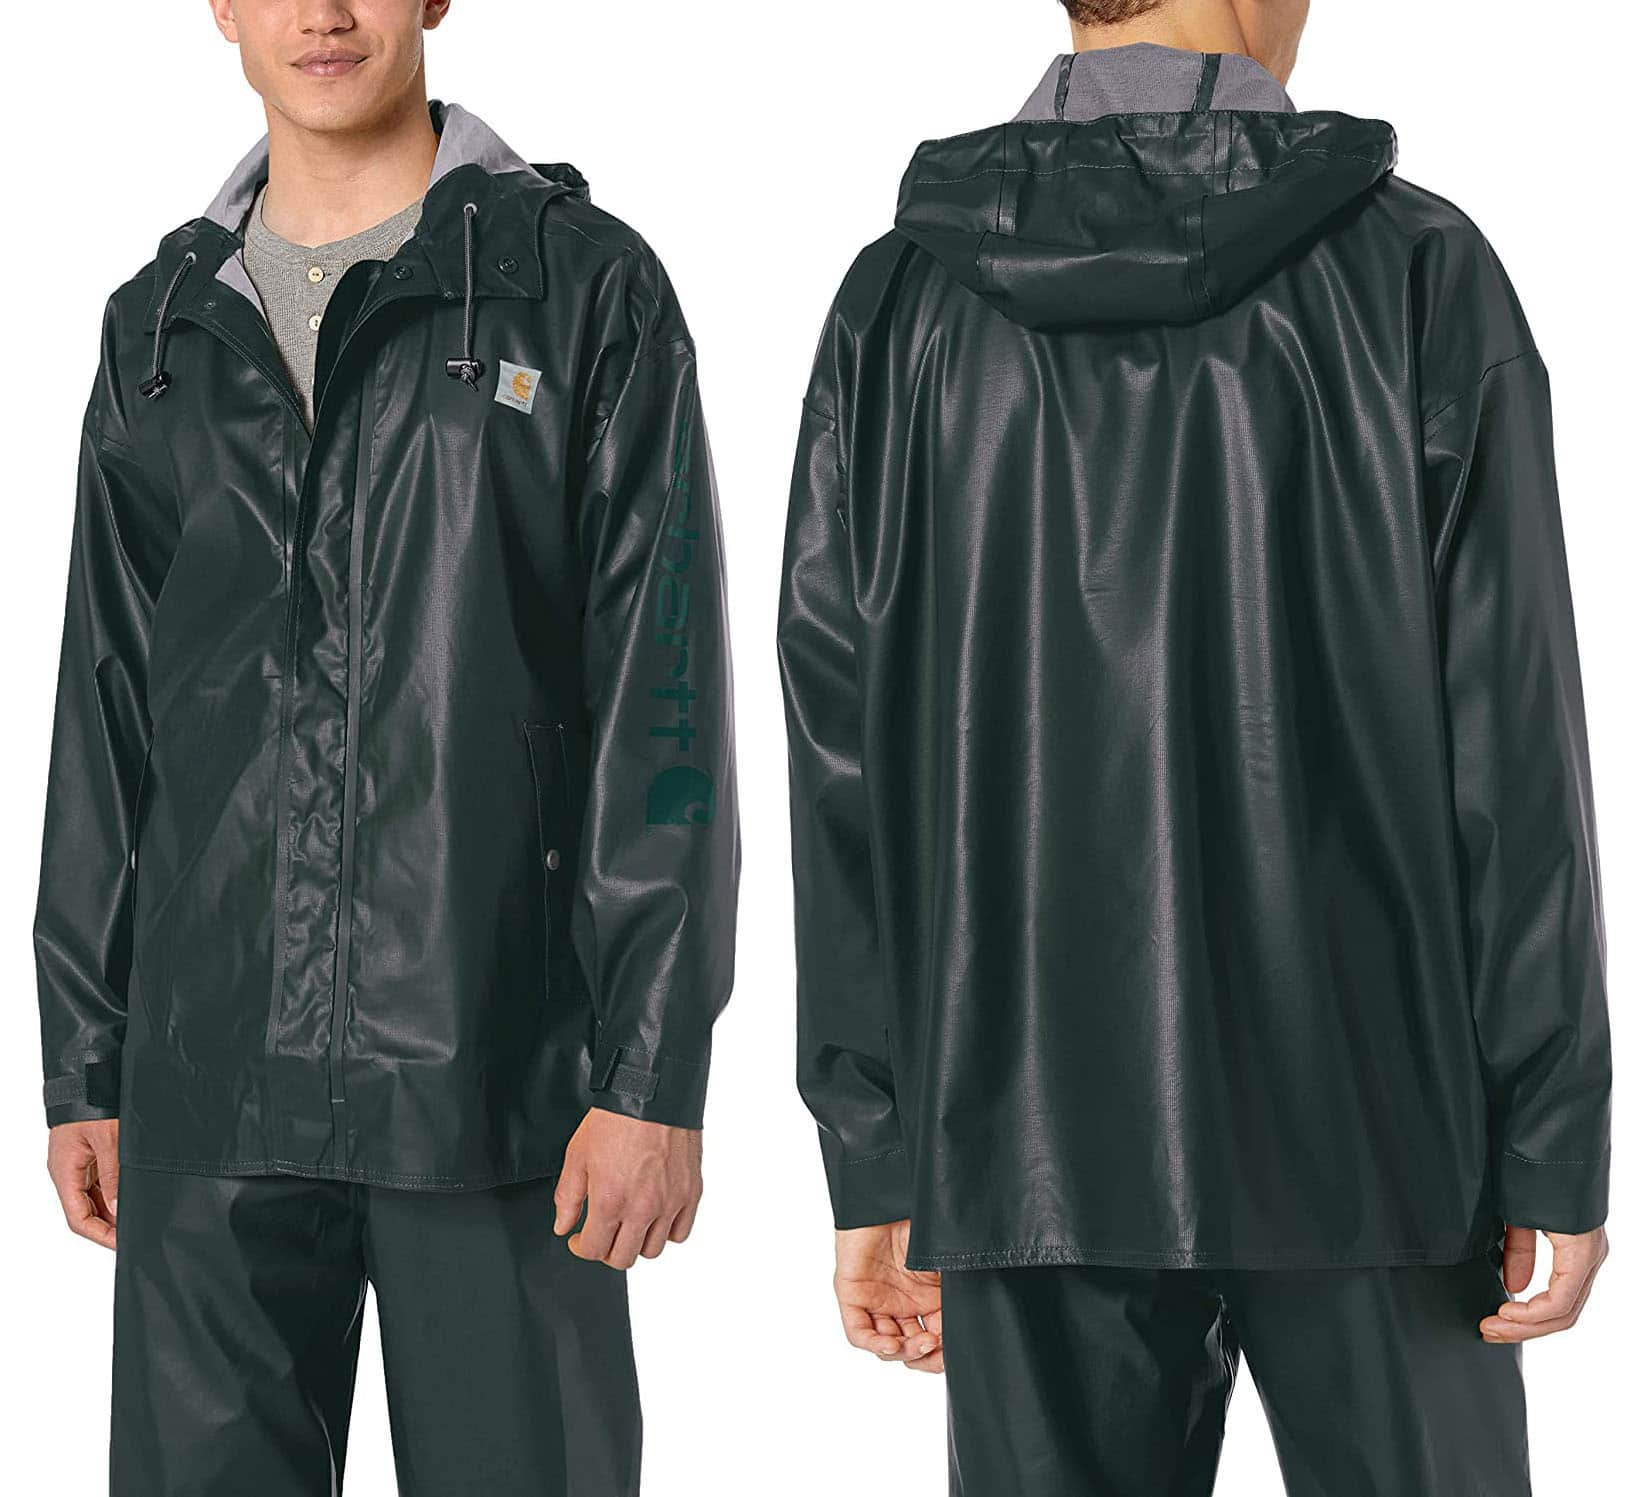 Designed for heavy rains, this Carhartt jacket guarantees full coverage and lightweight comfort with its waterproof shell comprised of 0.35 mm 92% polyethylene and 8% vinyl acetate